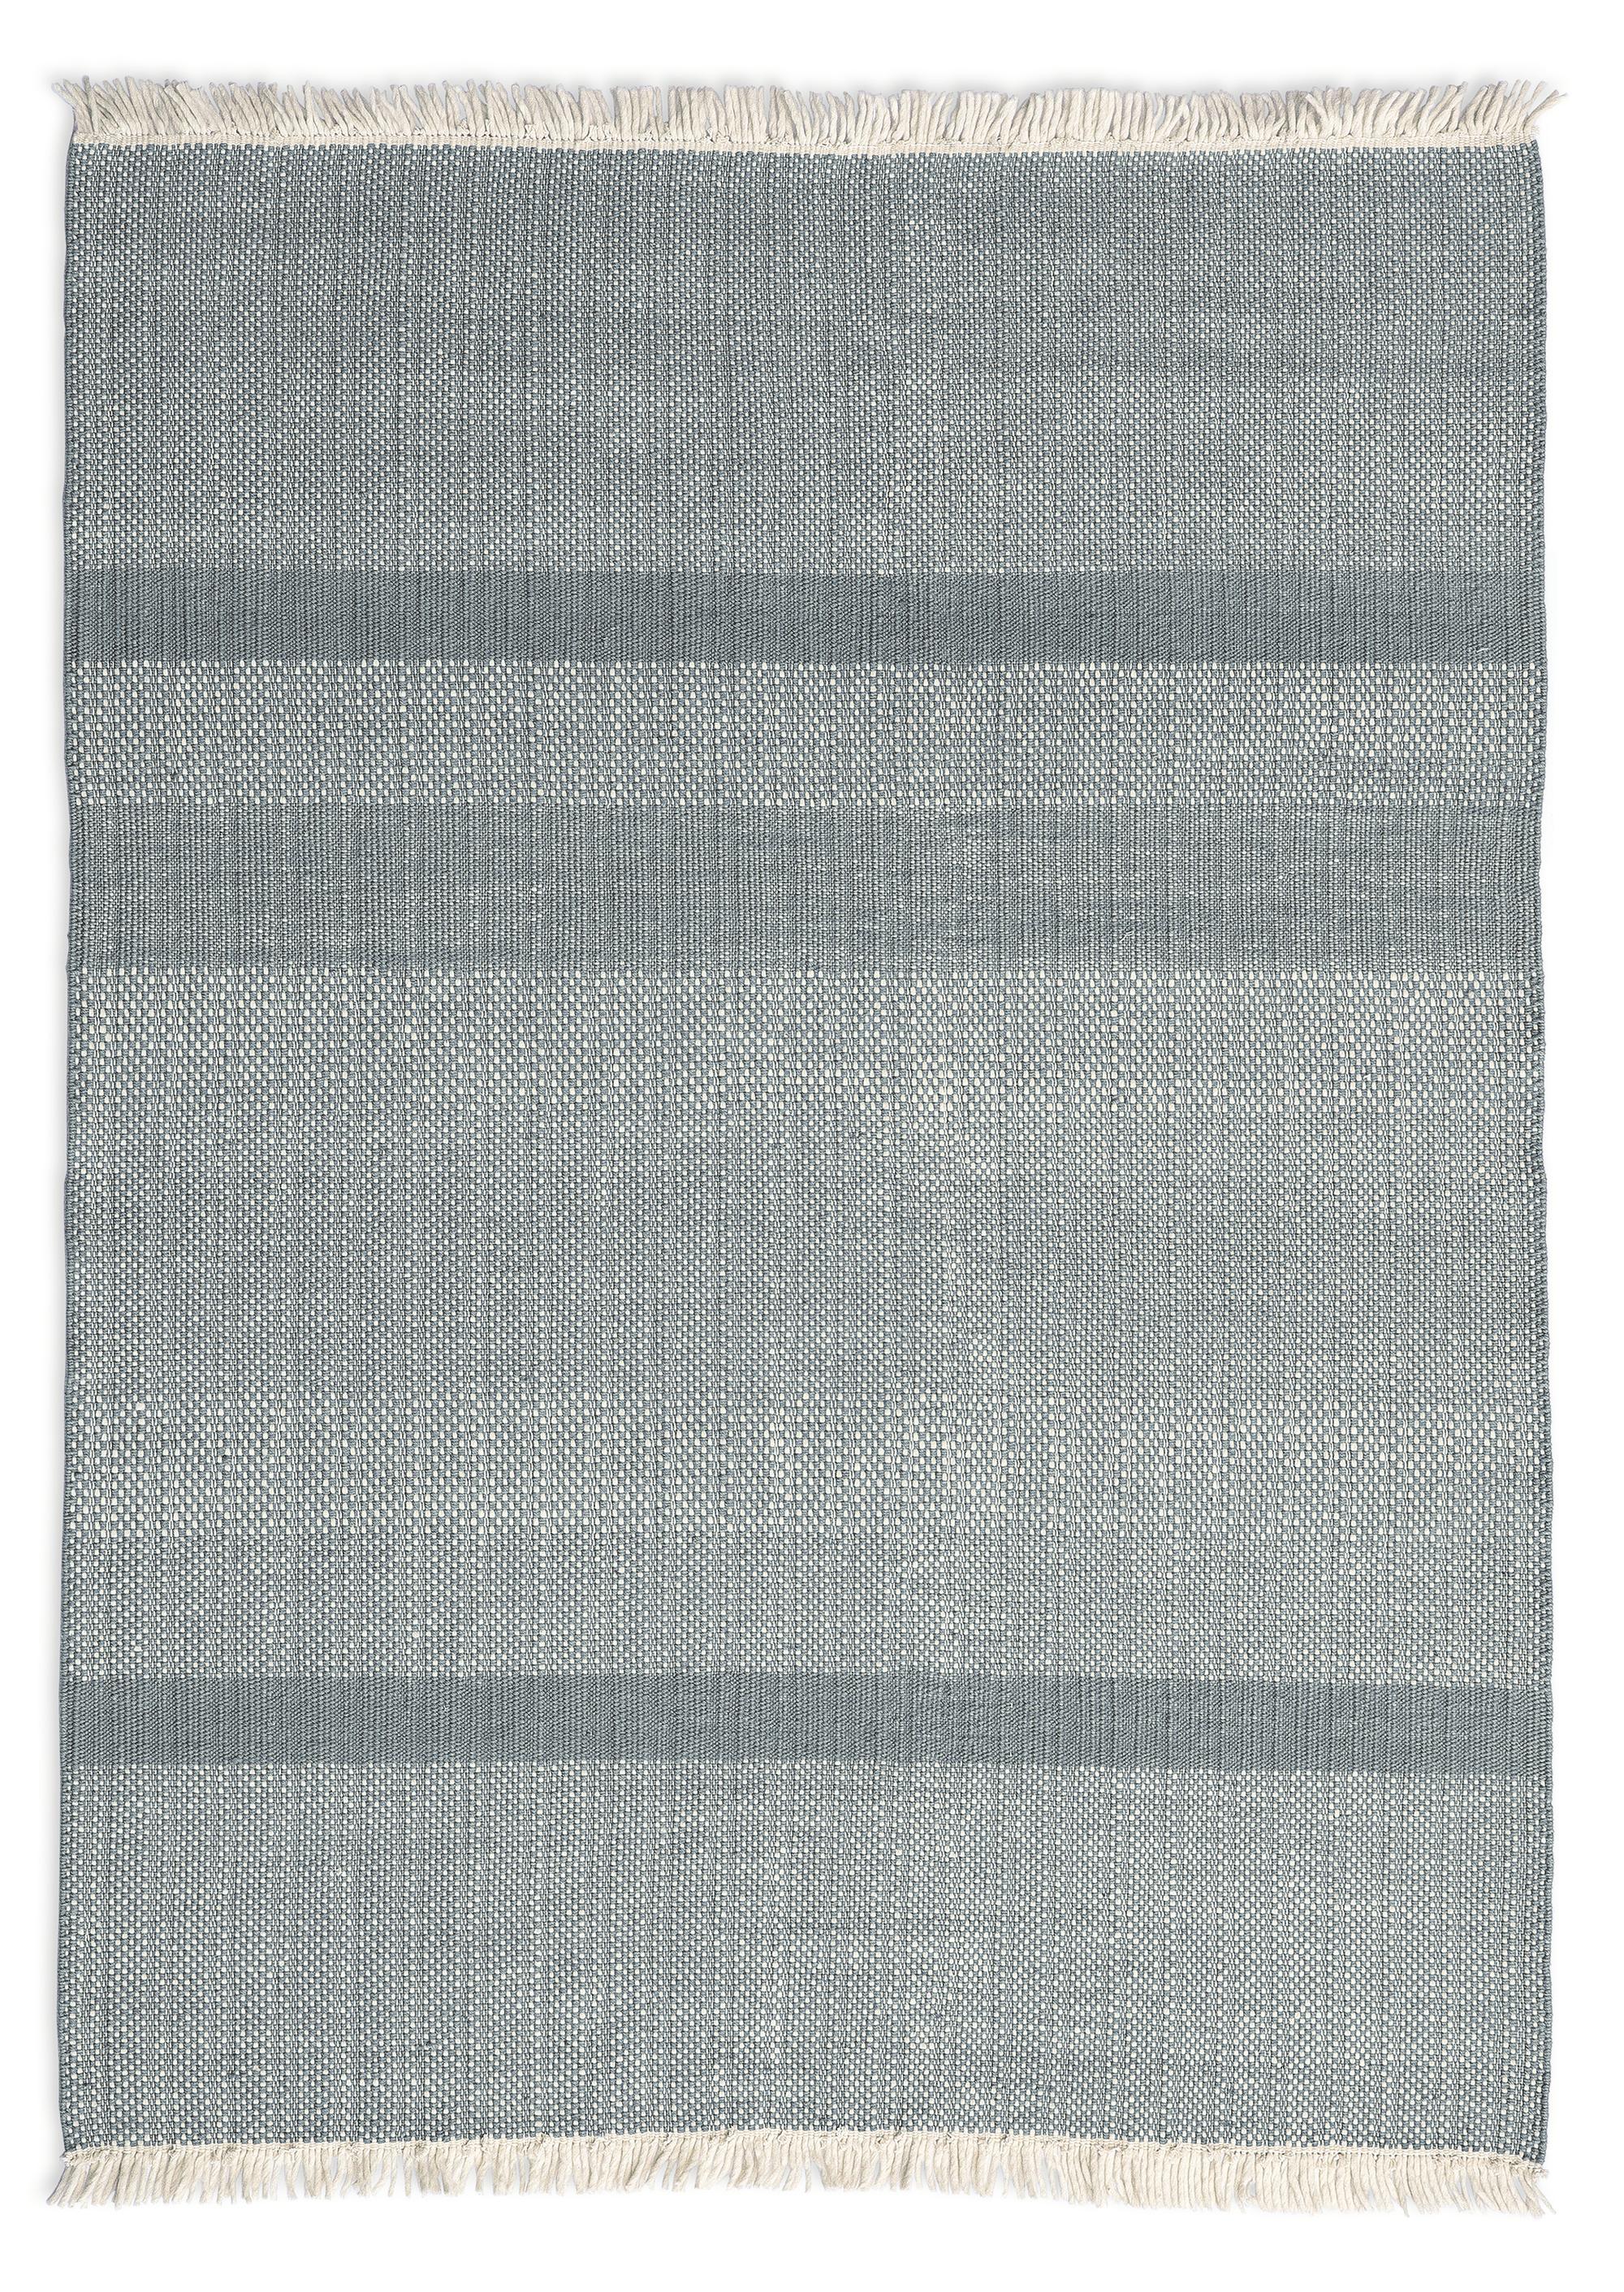 Small 'Tres Texture' Hand-Loomed Rug for Nanimarquina For Sale 4